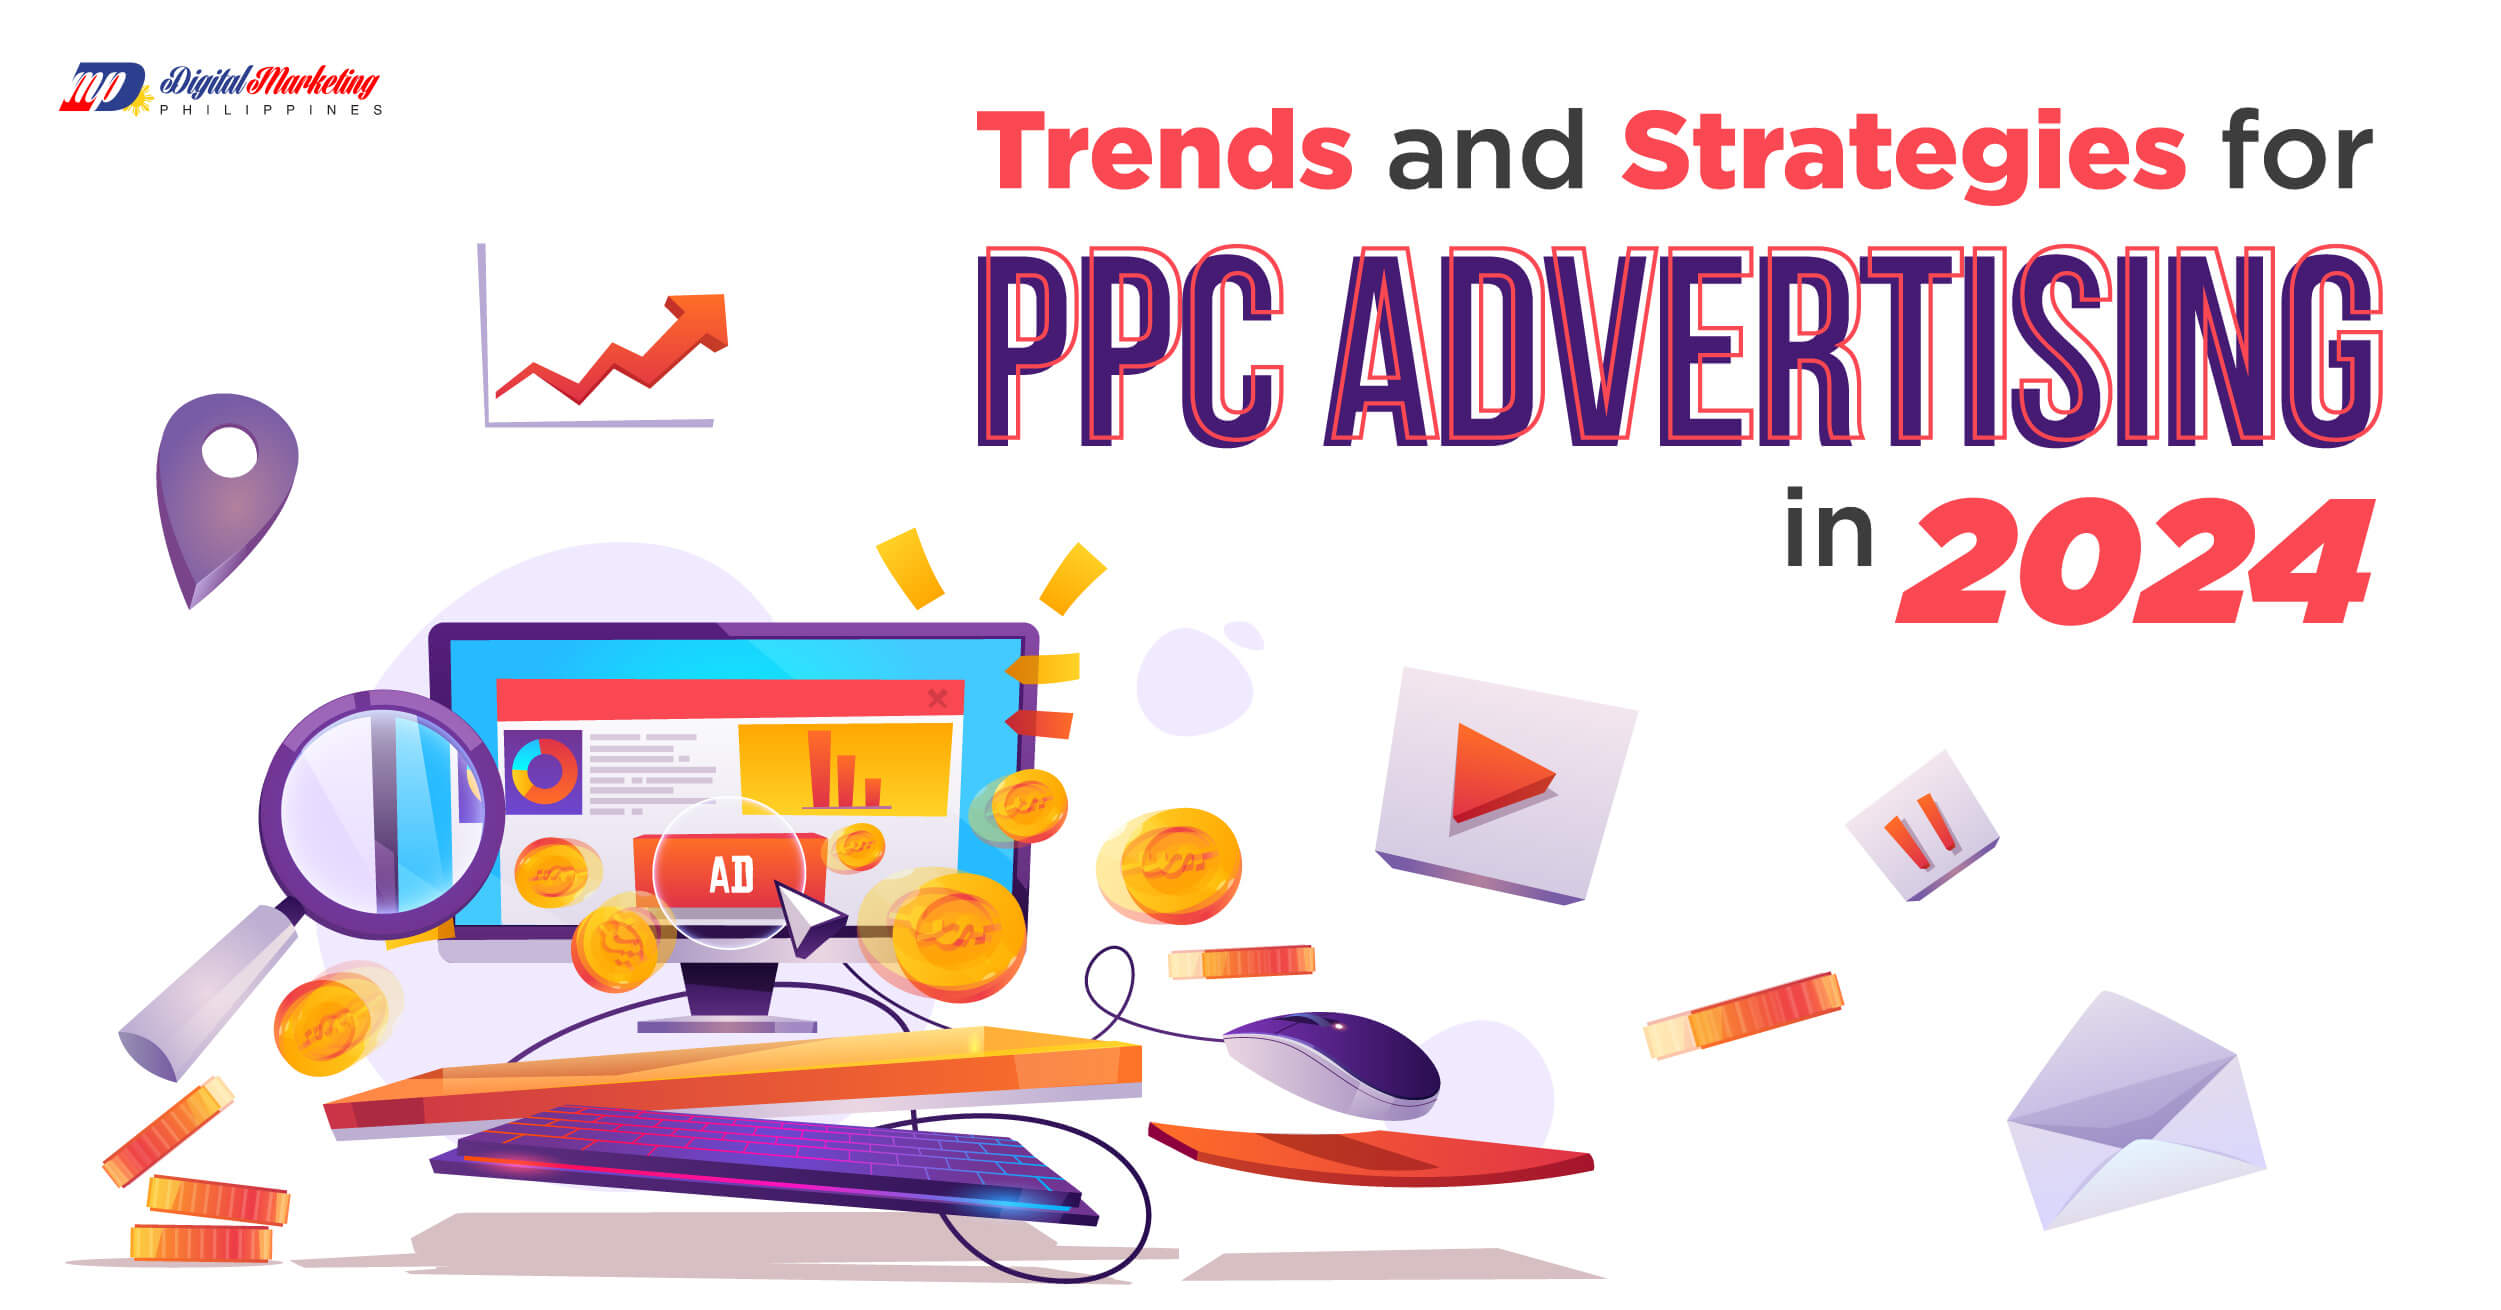 Trends and Strategies for PPC Advertising in 2024 featured image